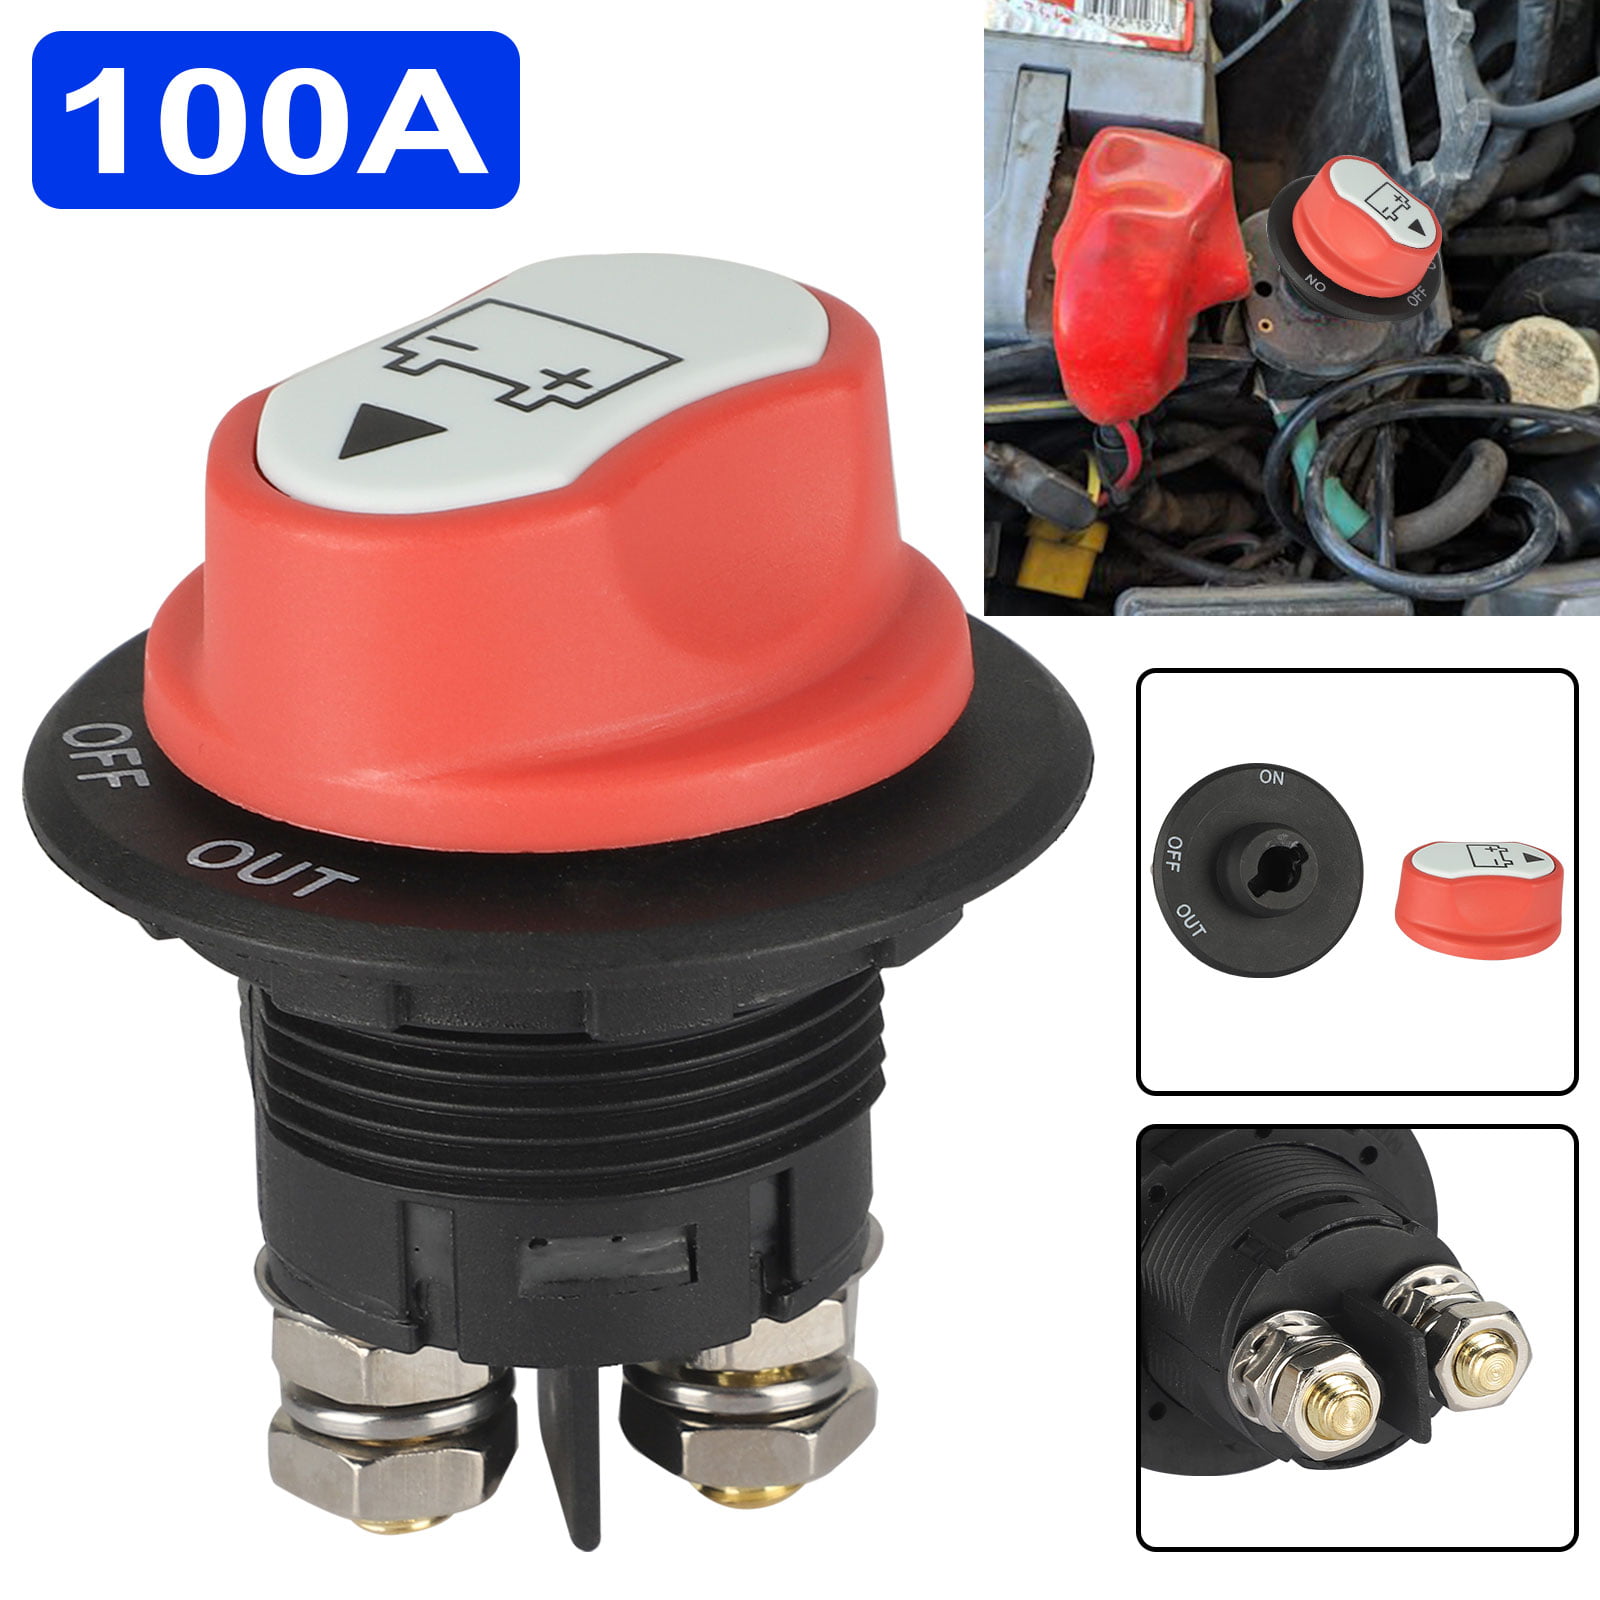 Auto Car 12V Master Battery Disconnect Isolator Cut off Power Kill Switch 